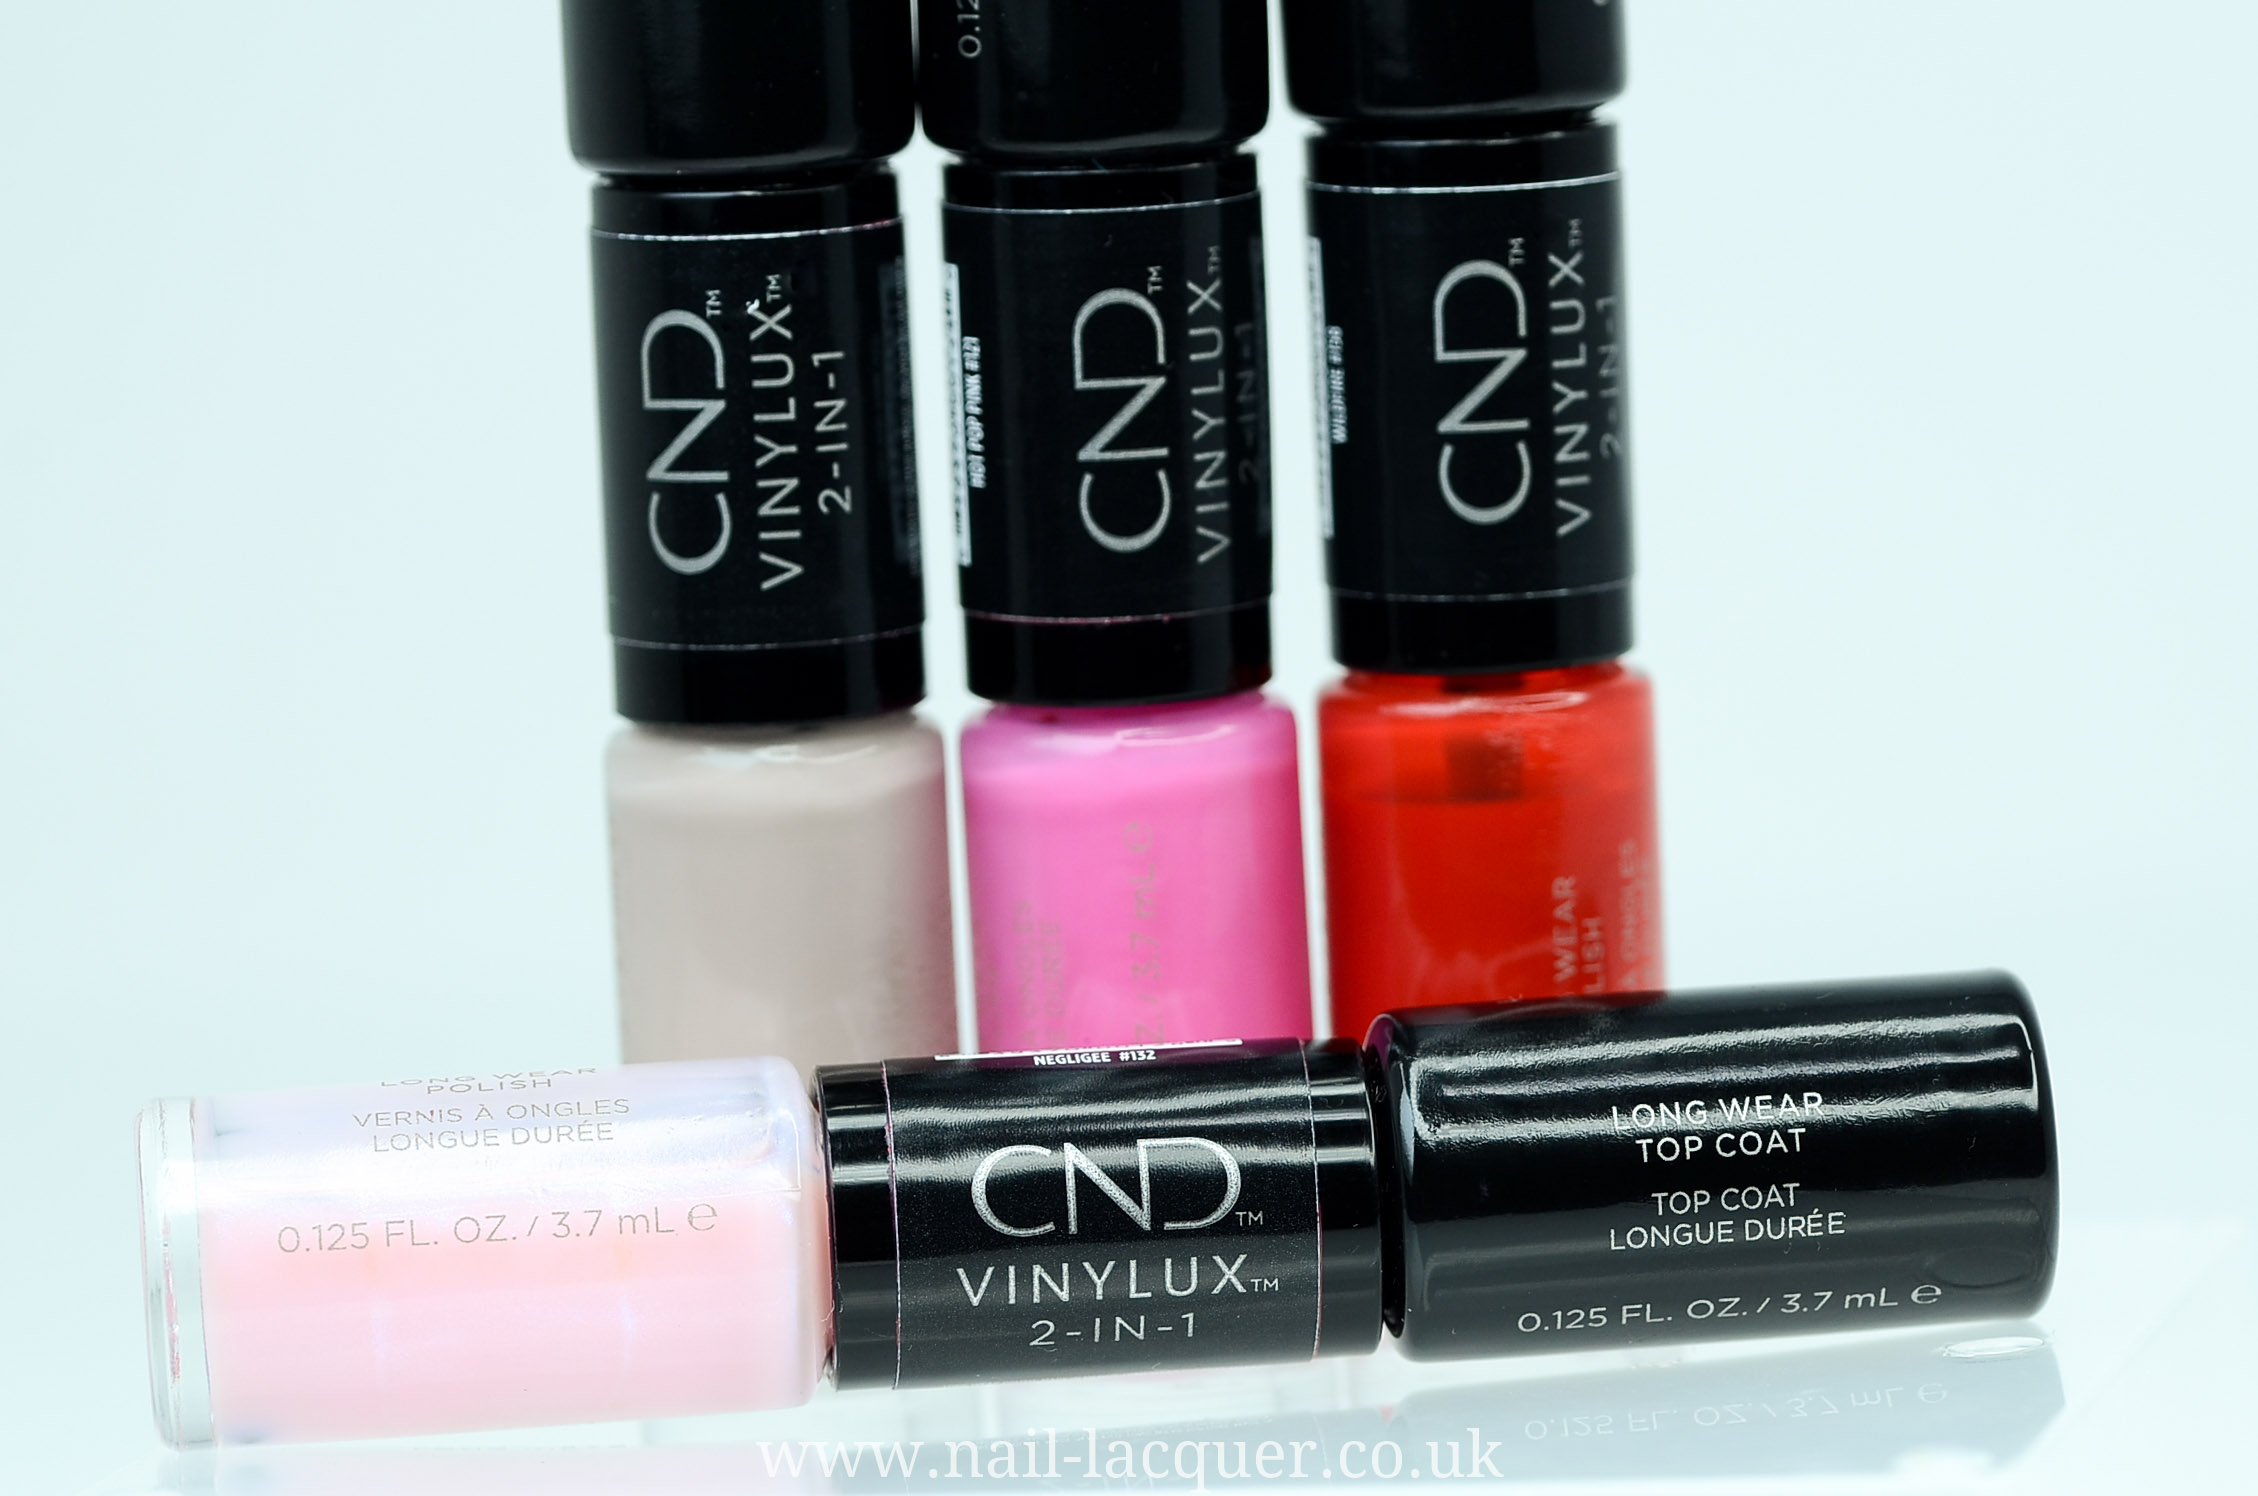 7. CND Vinylux Long Wear Nail Polish with Antifungal Treatment - wide 2